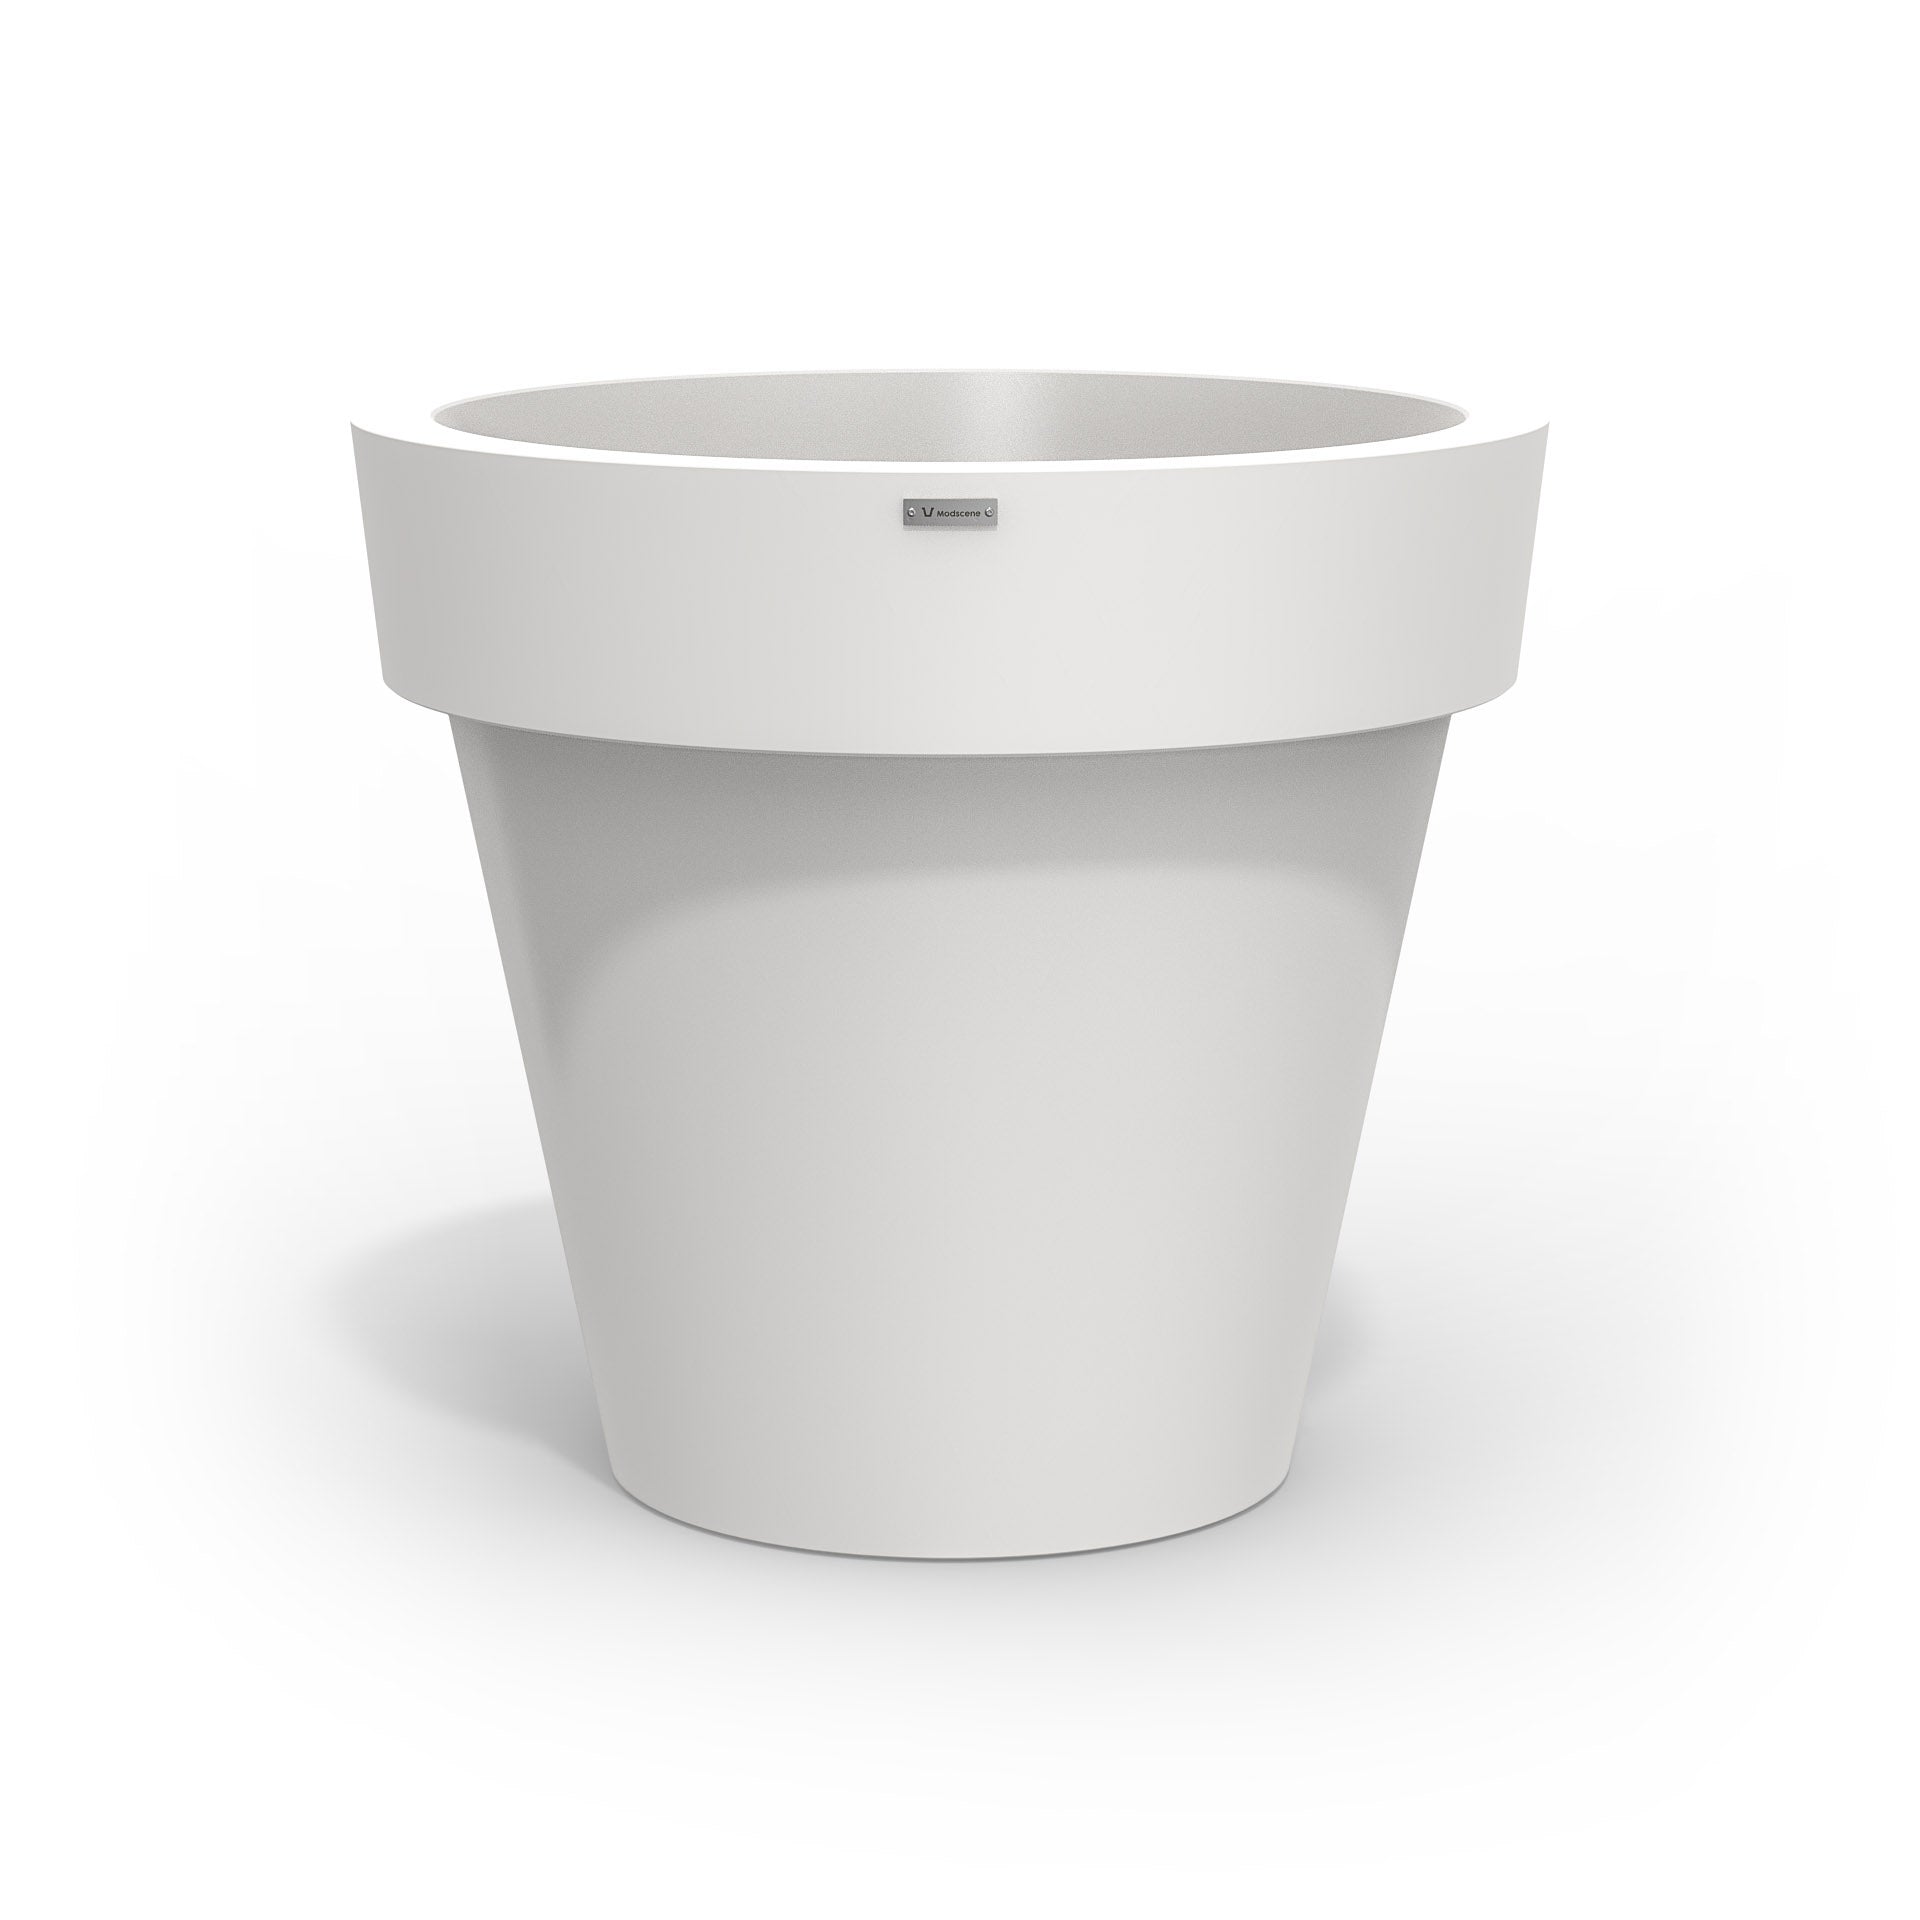 A large white planter pot made by Modscene New Zealand.